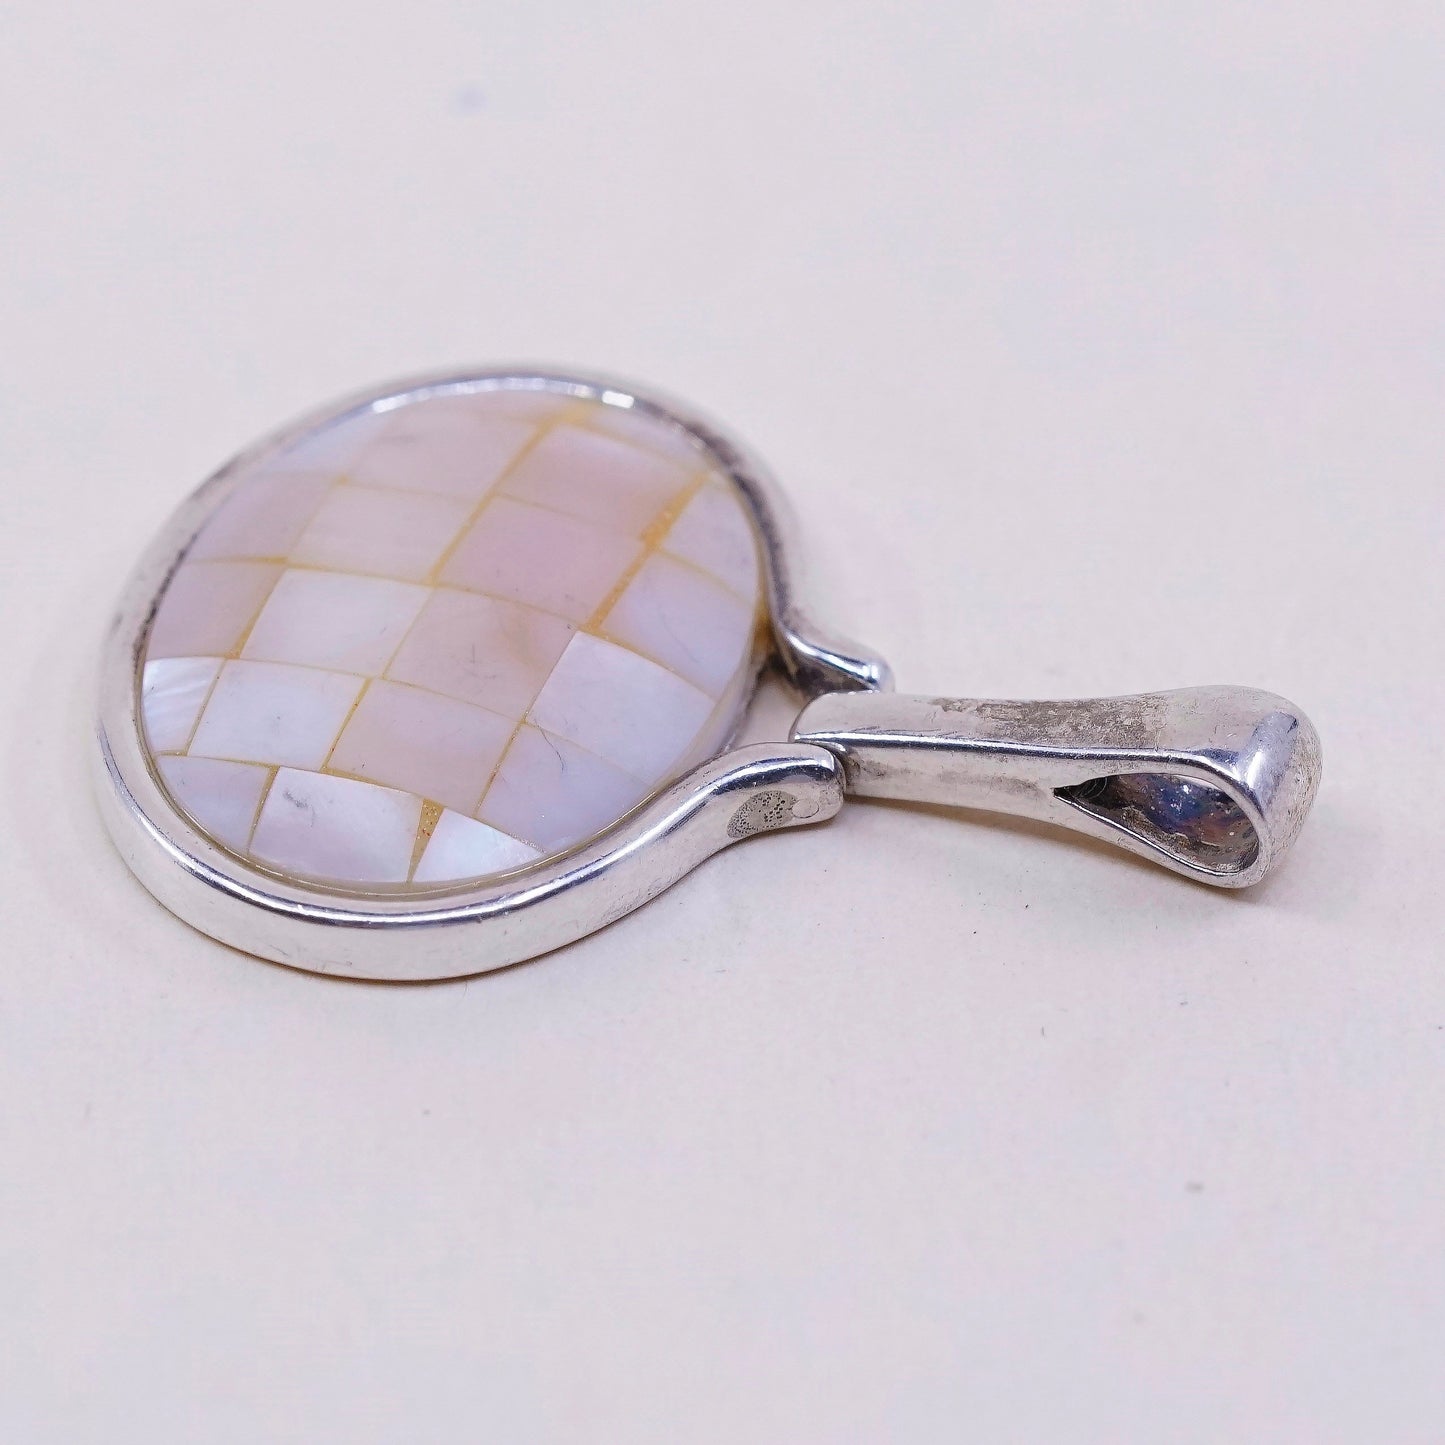 VTG sterling silver handmade pendant, 925 silver oval with pink mother of pearl